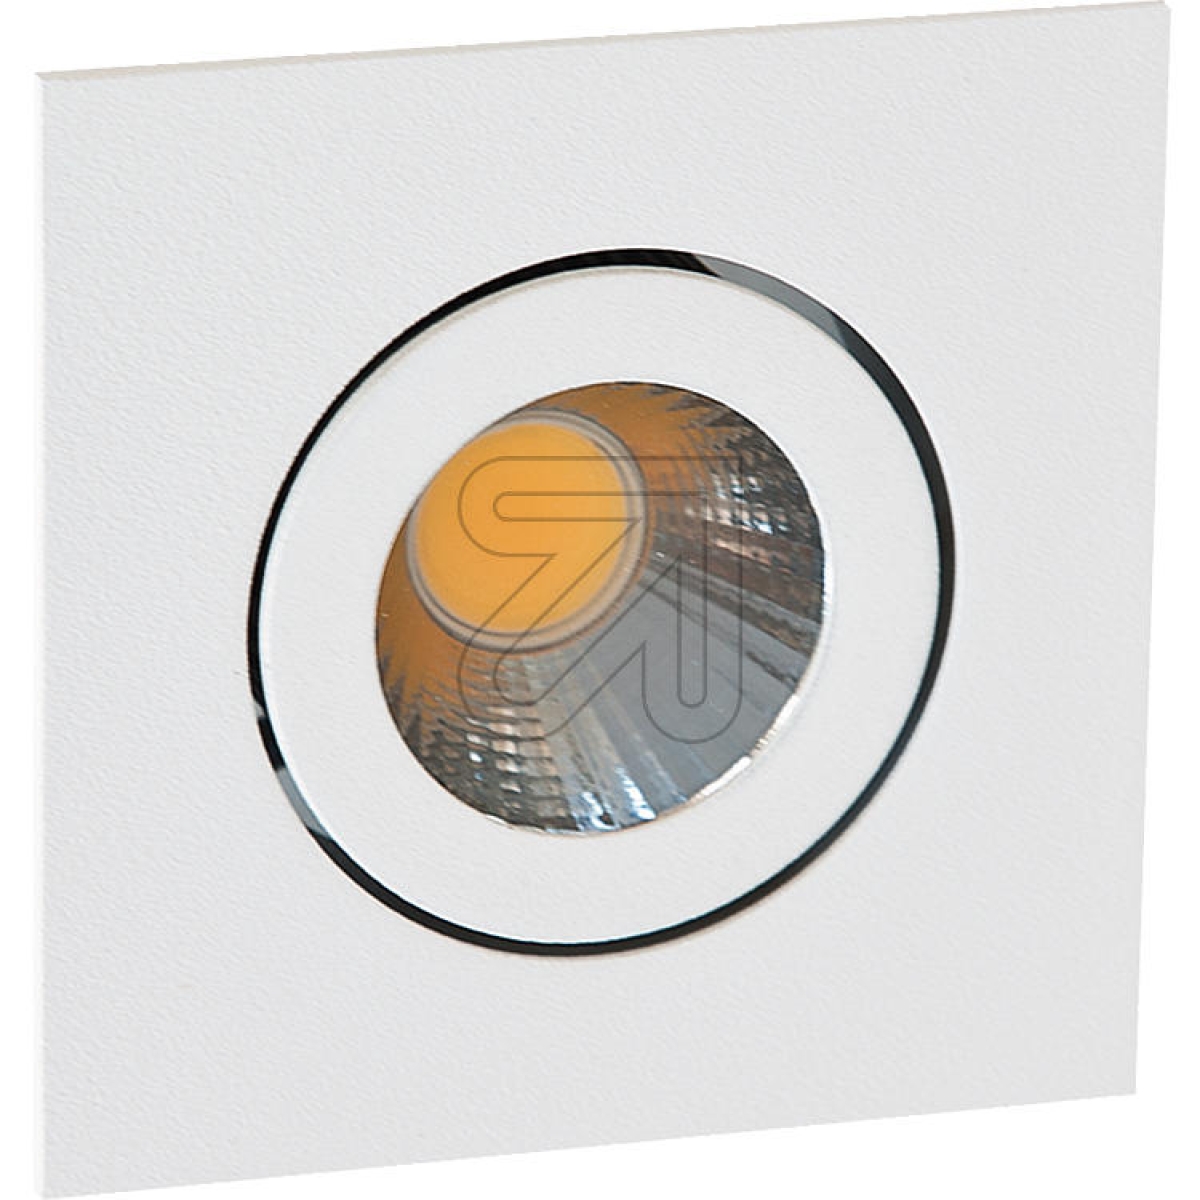 EVNLED recessed light white 3000K 8.4W PC24N90102Article-No: 624100